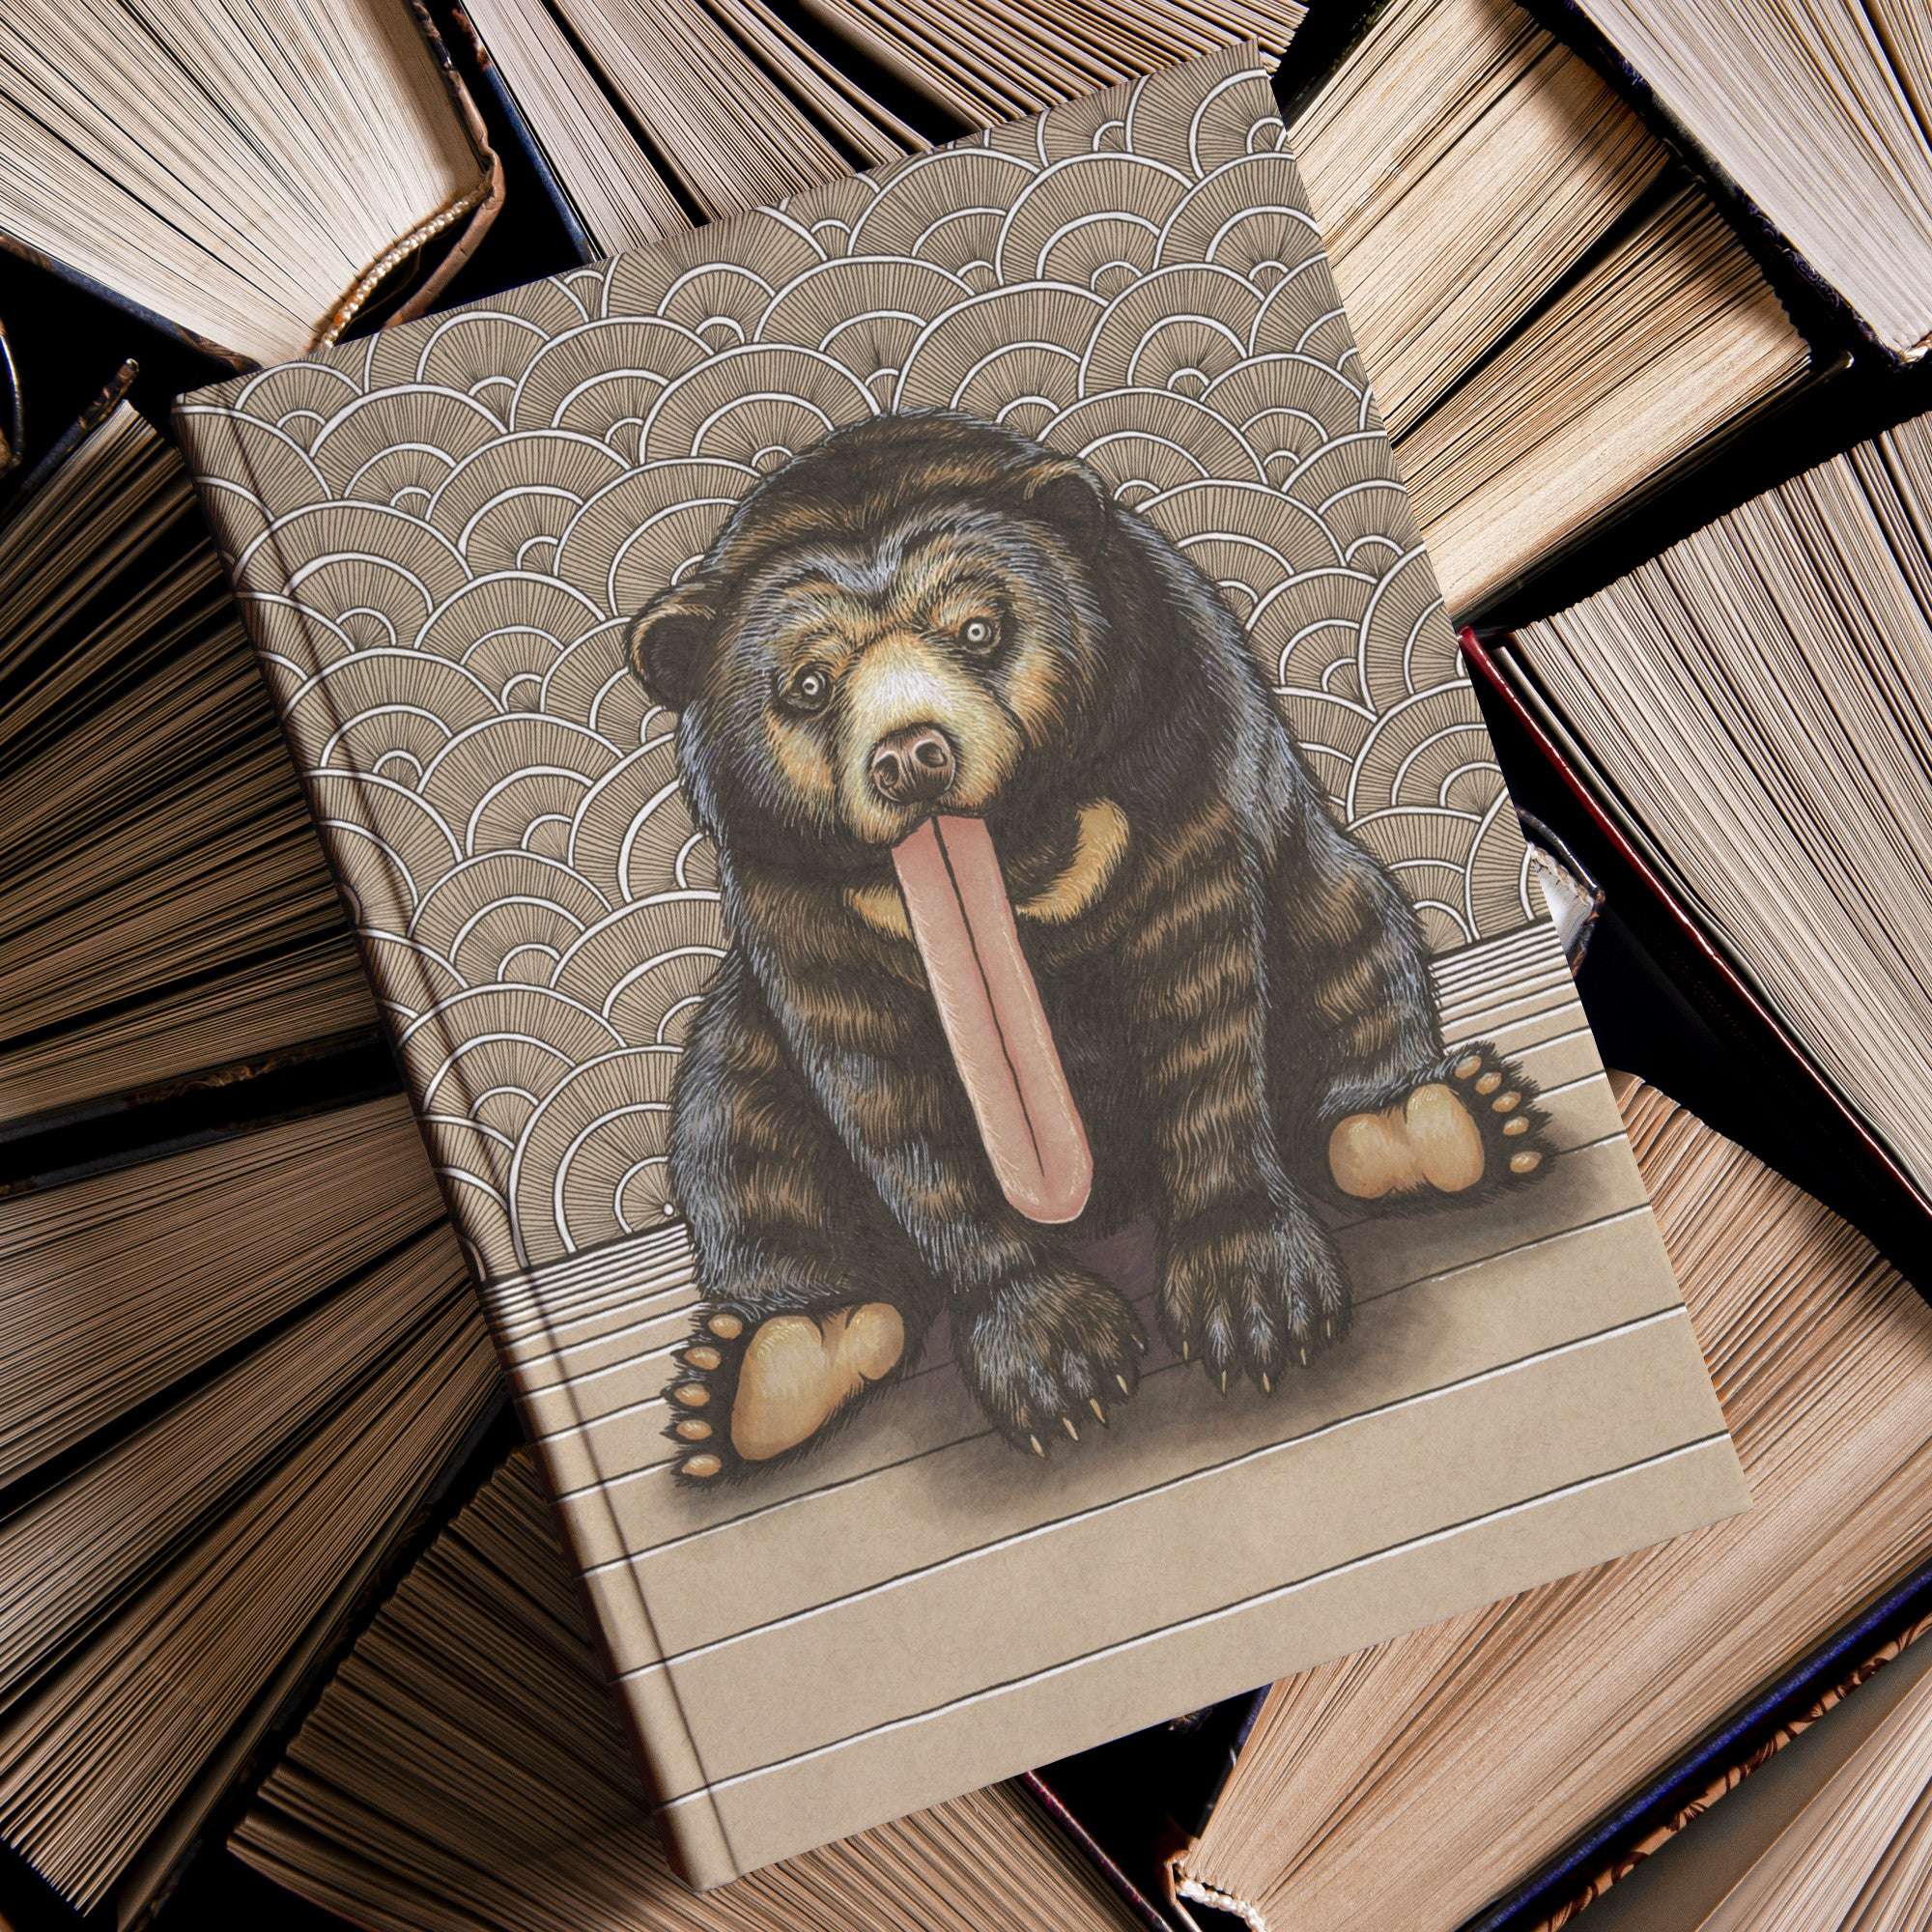 A Sun Bear Journal with an illustrated cover featuring a bear sticking out its tongue, resting on a pile of old books.